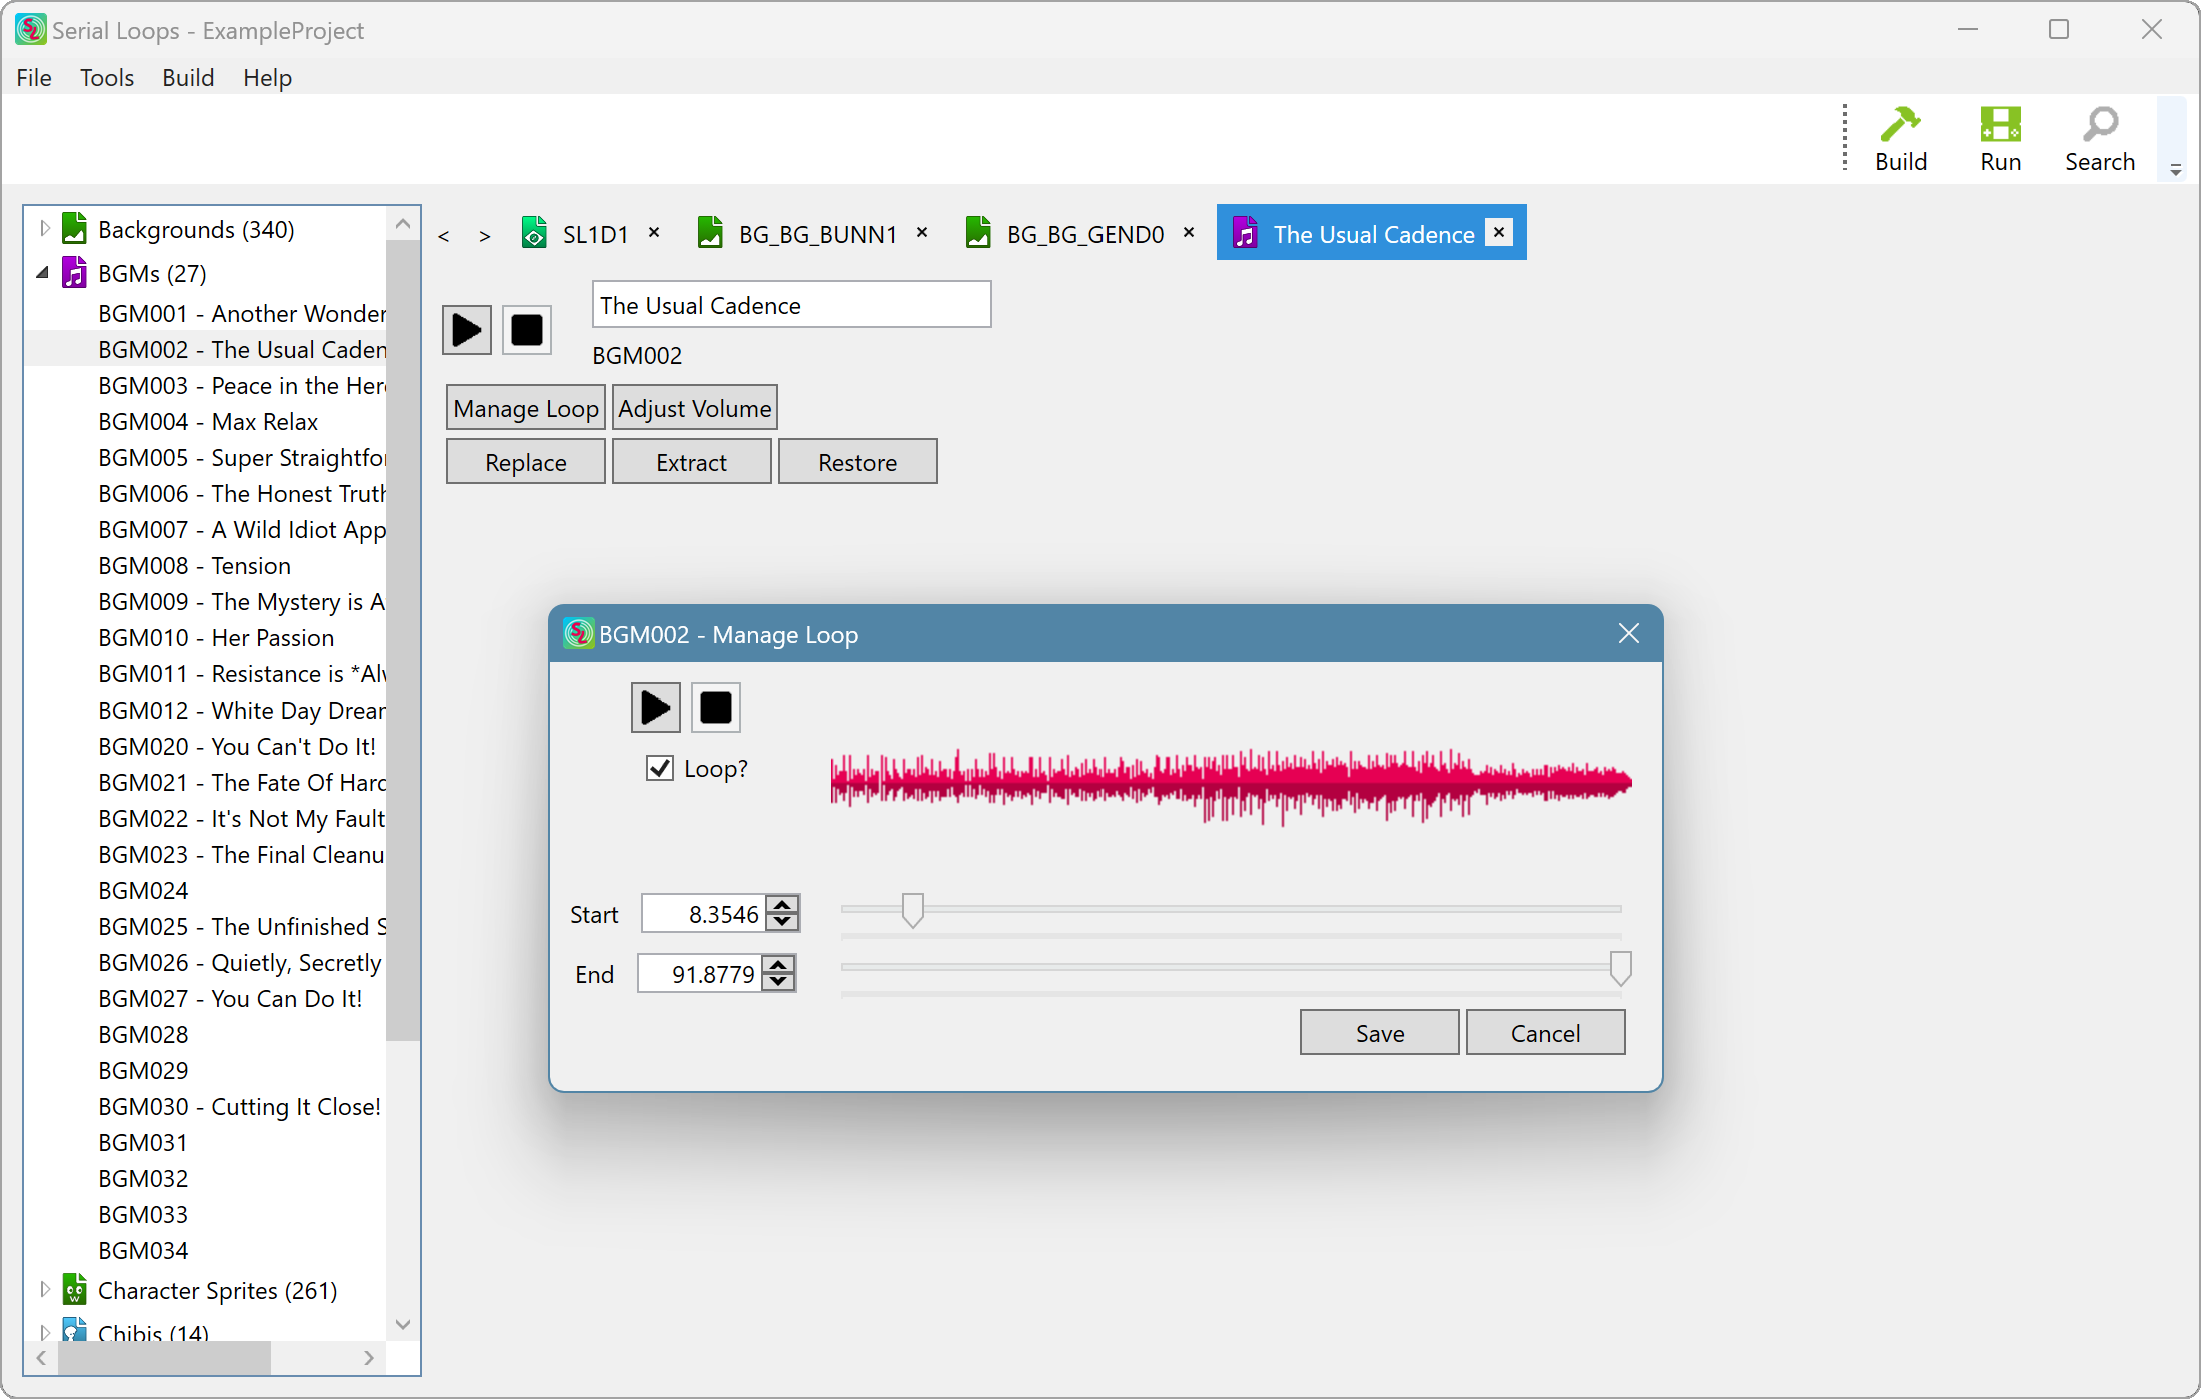 Screenshot of the Serial Loops sound editor, featuring a modal widget with a sound wave graph. Buttons to start and stop playback are present, as are sliders and a checkbox to enable looping and adjust the track loop start and end points.